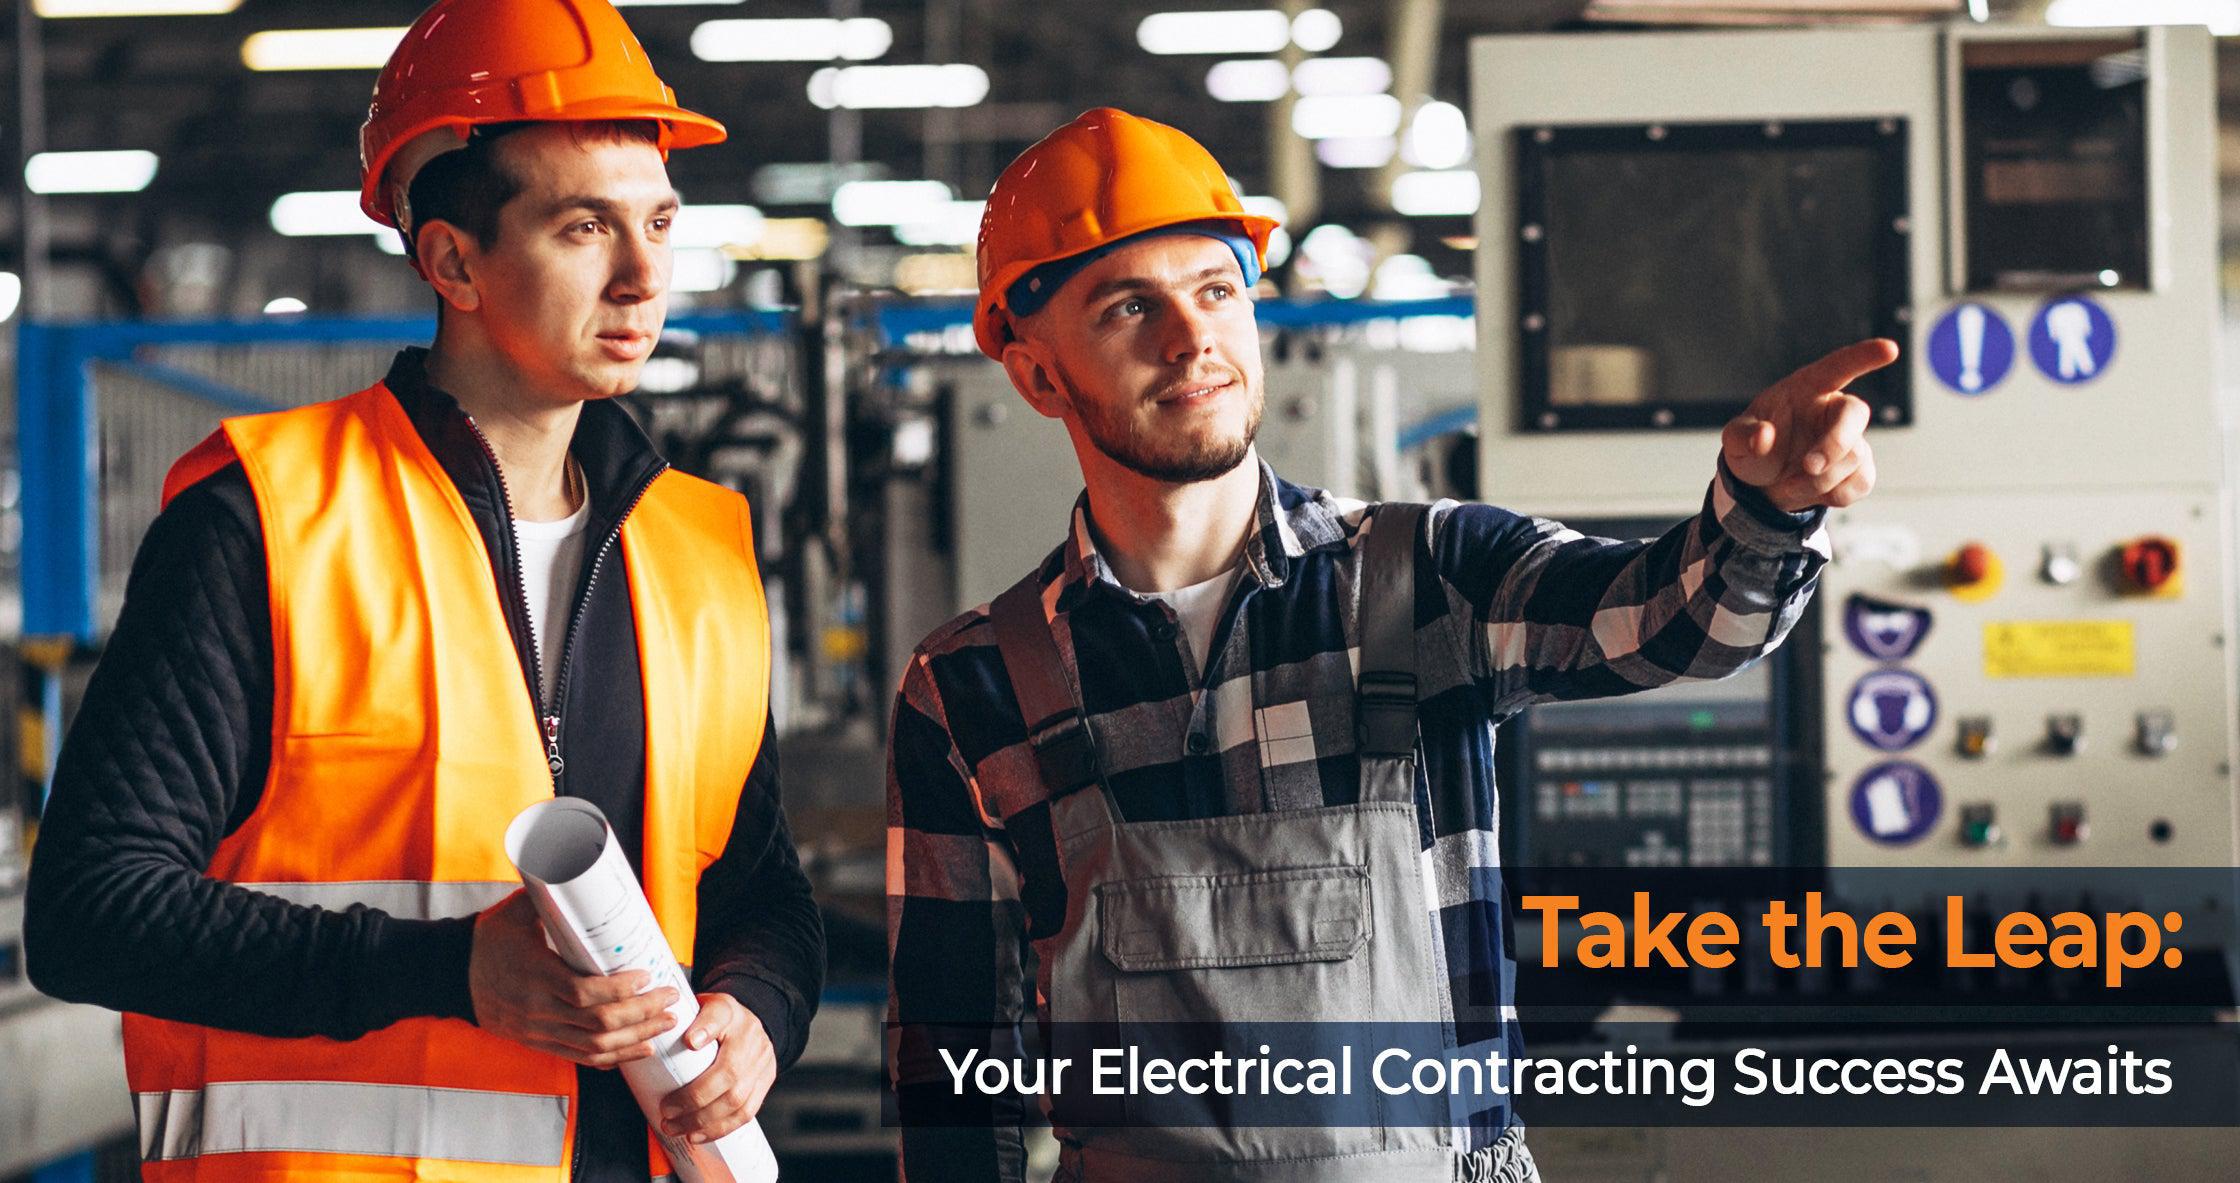 Two electricians in safety gear discussing project details in a manufacturing plant, highlighting the collaborative aspect of electrical contracting business.